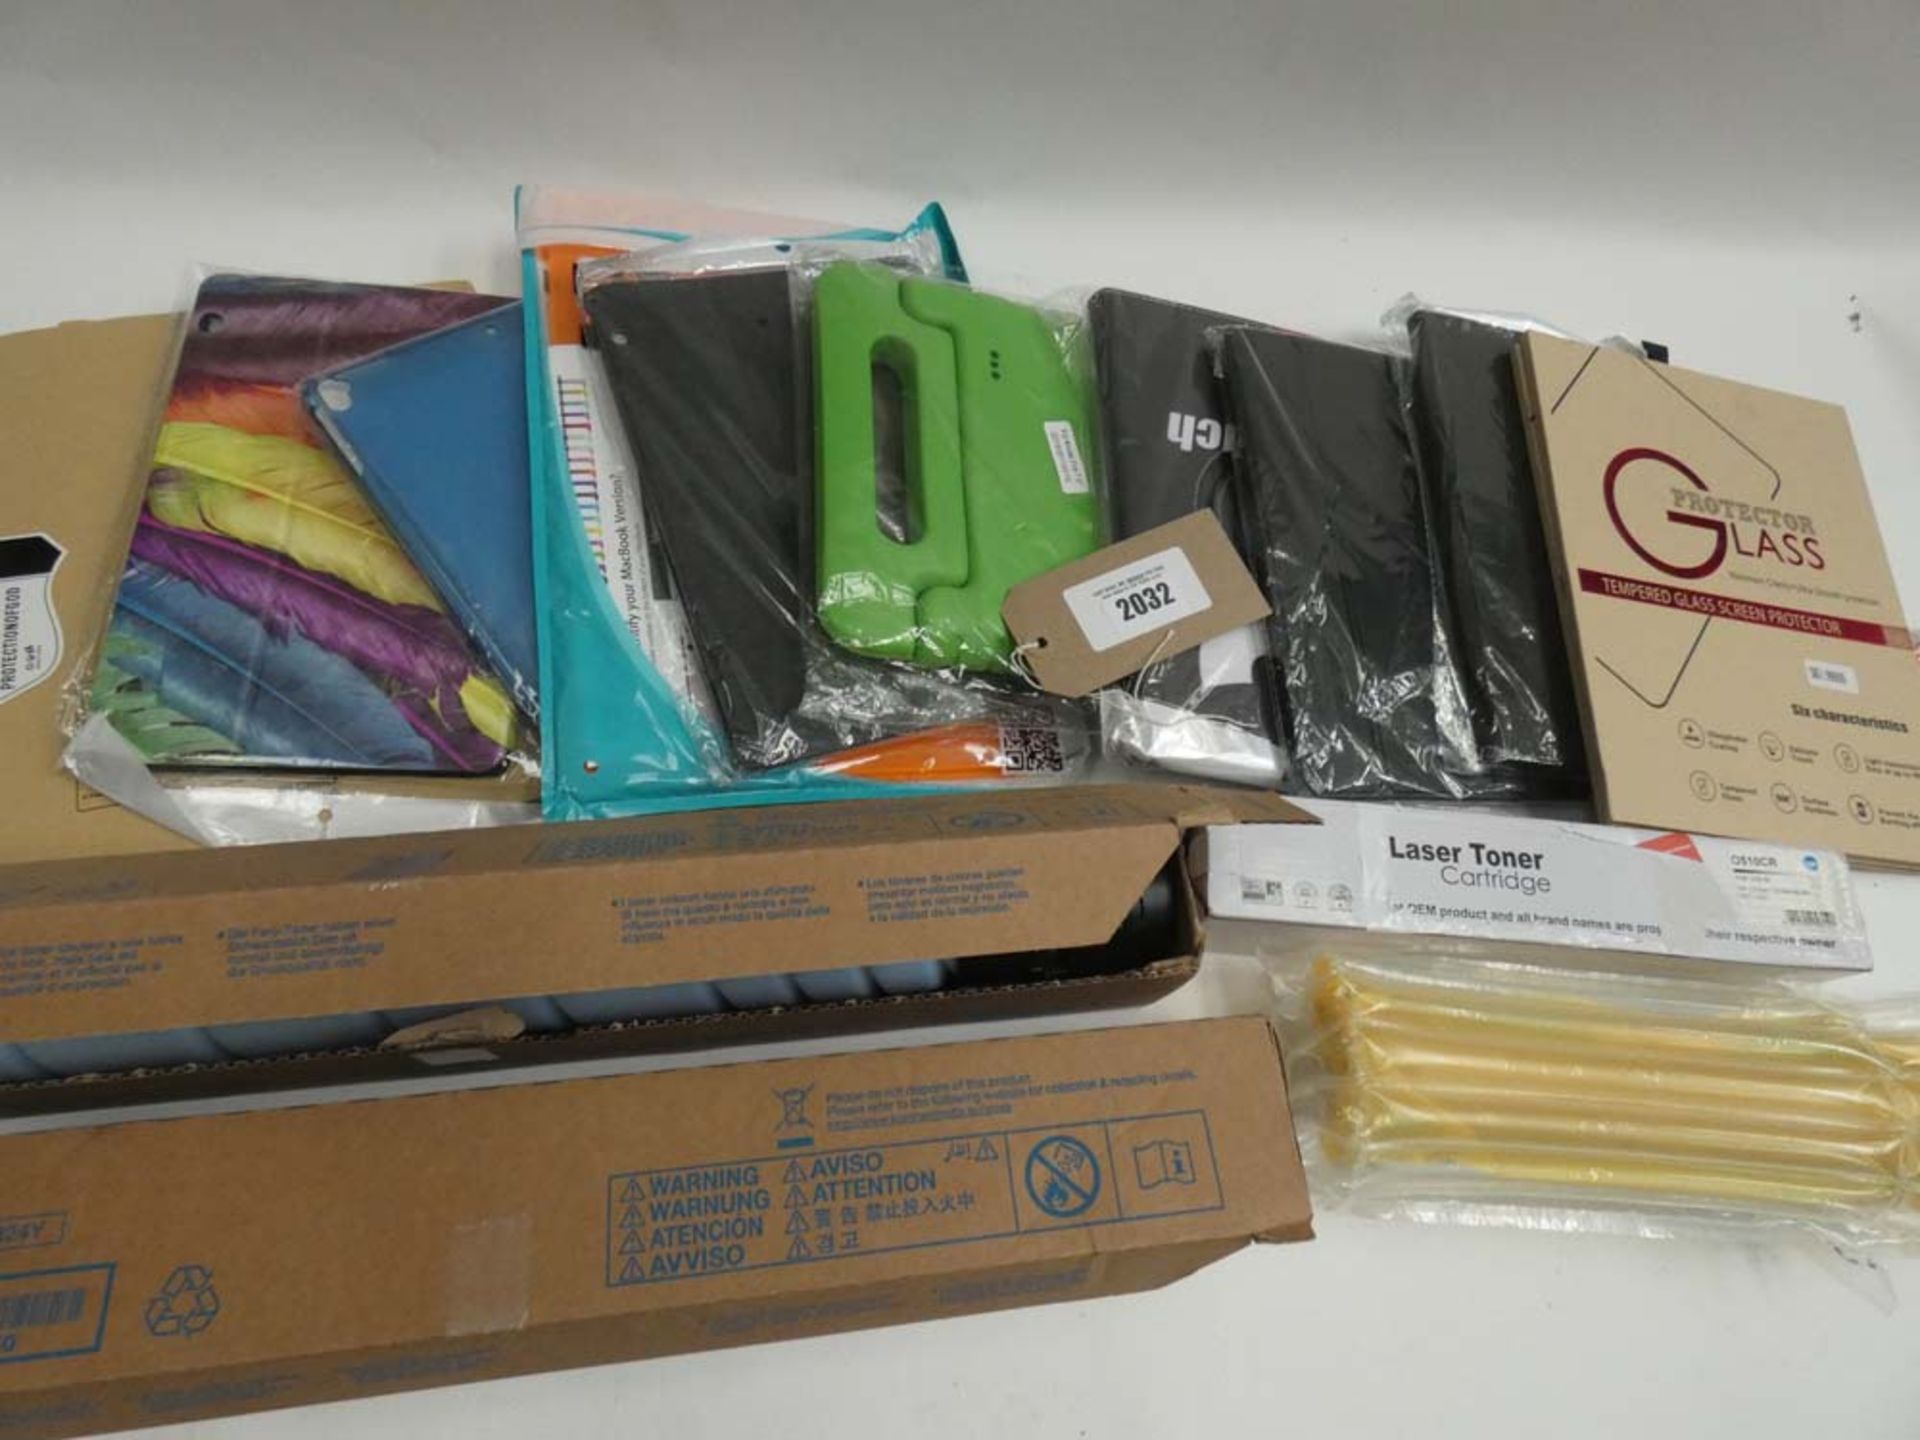 Bag containing various tablet cases/covers and printer toner